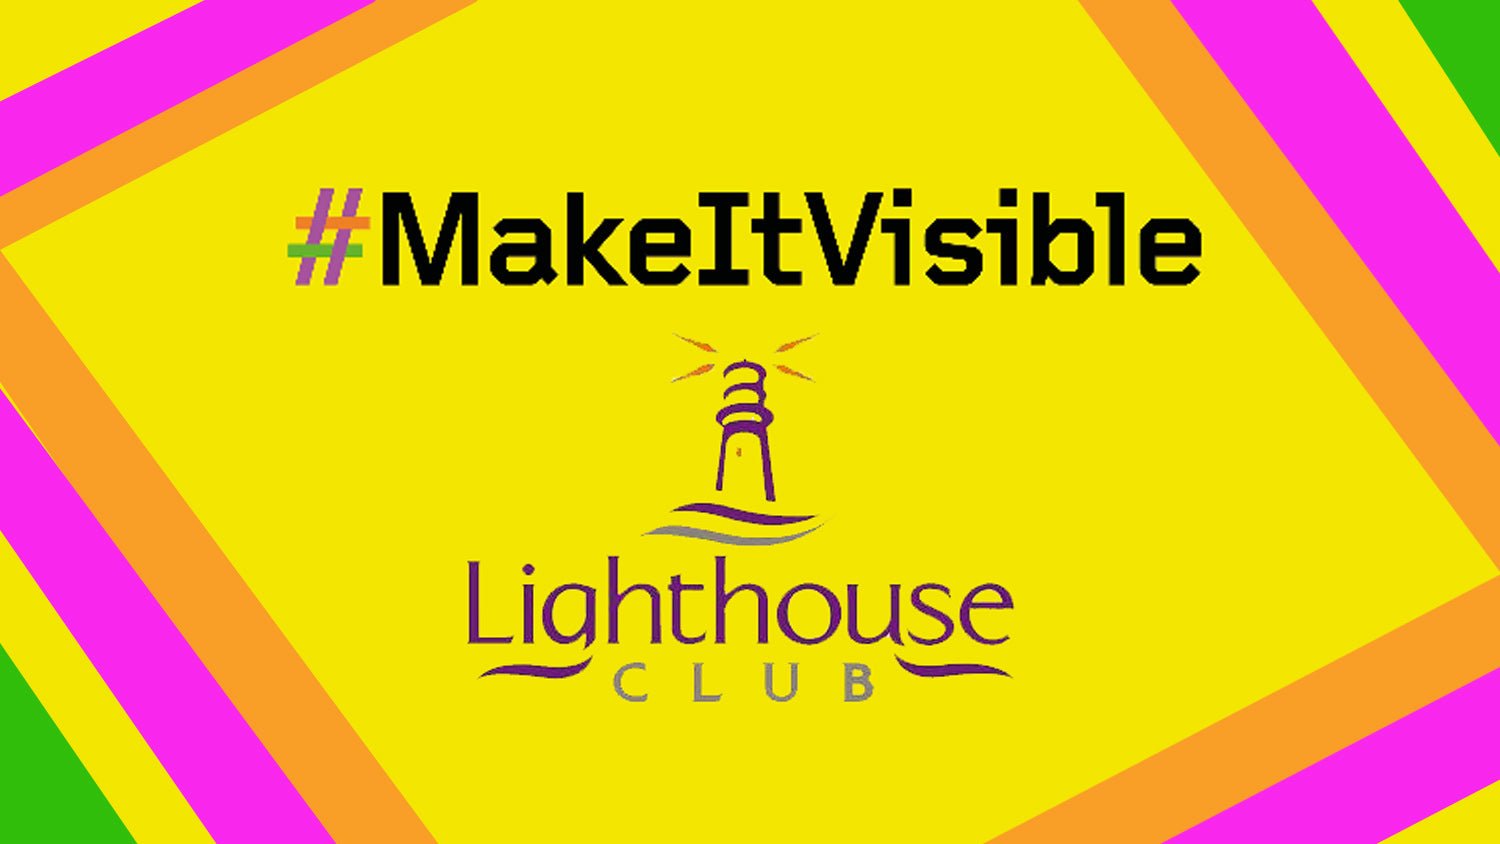 The Lighthouse Club - #MakeItVisible - TF Tools Ltd